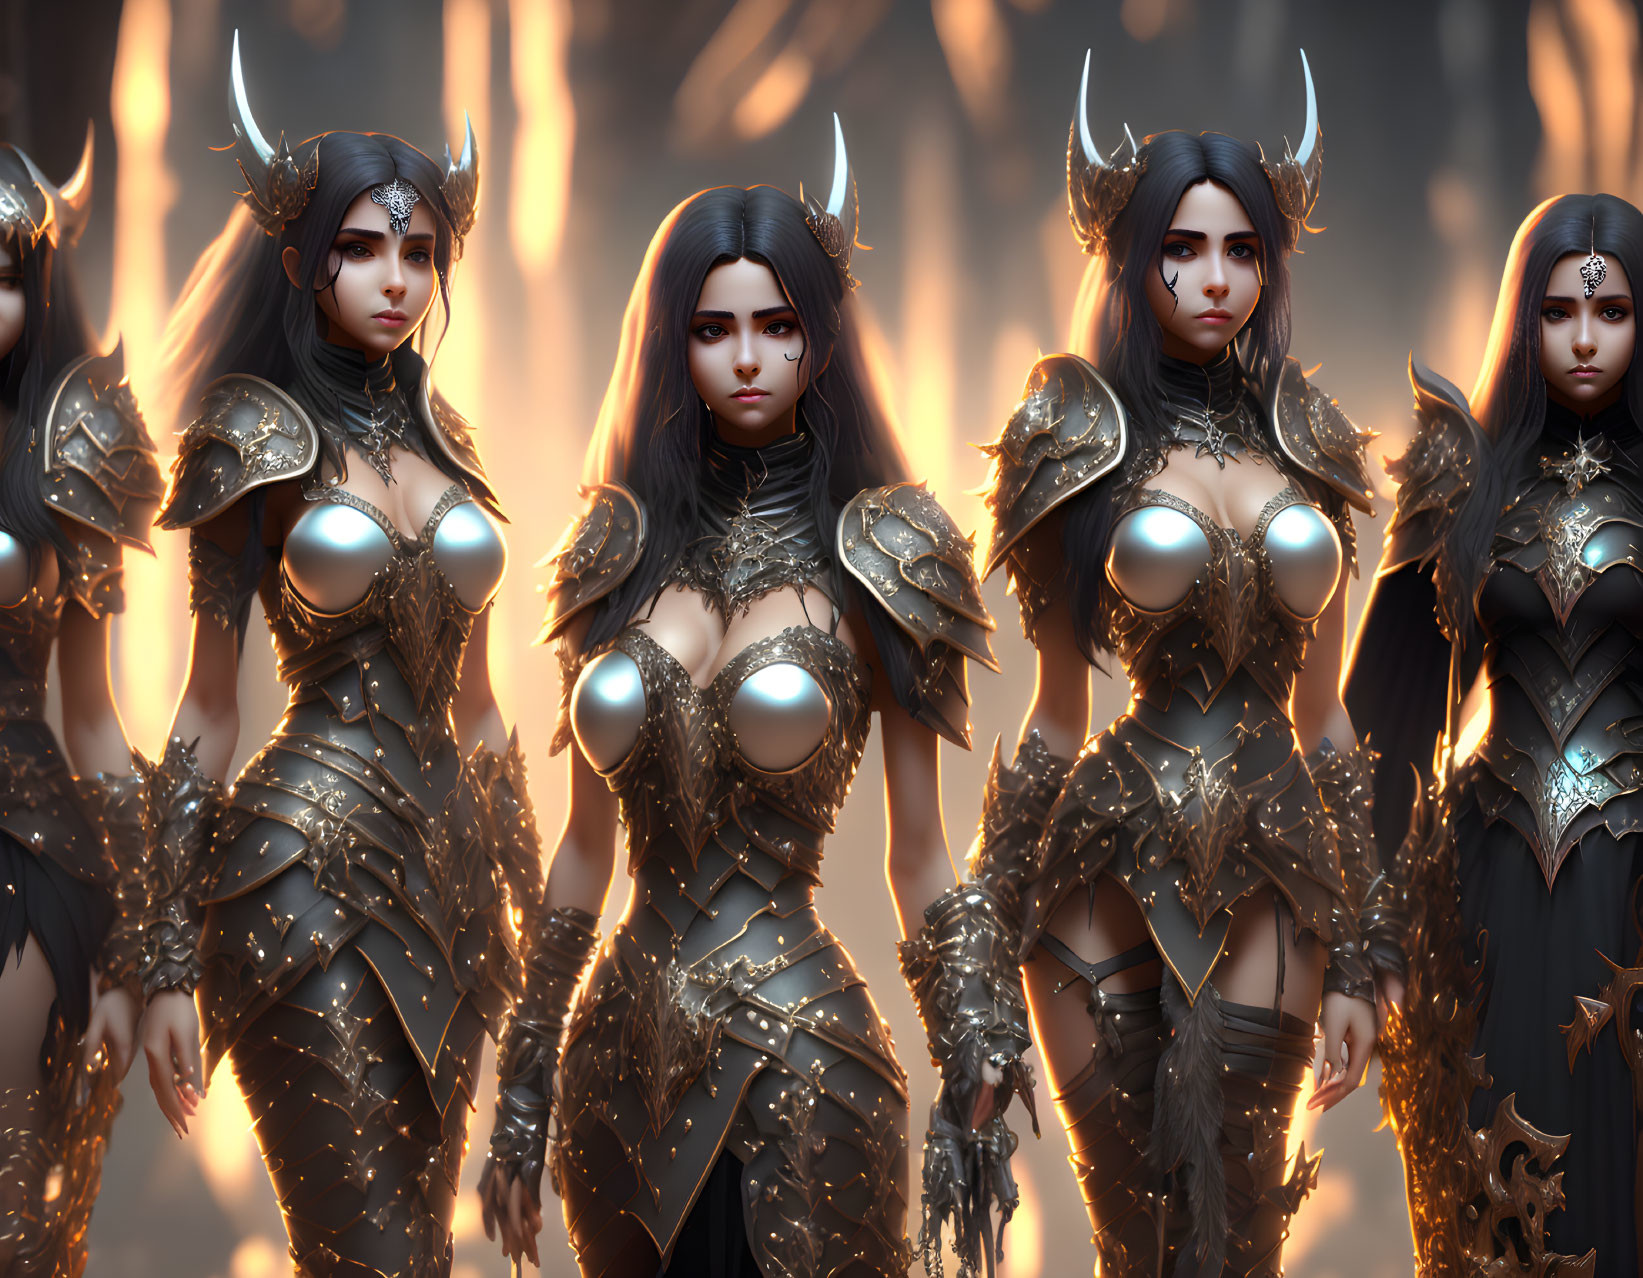 Five Female Warriors in Ornate Armor with Horned Helmets on Fiery Background